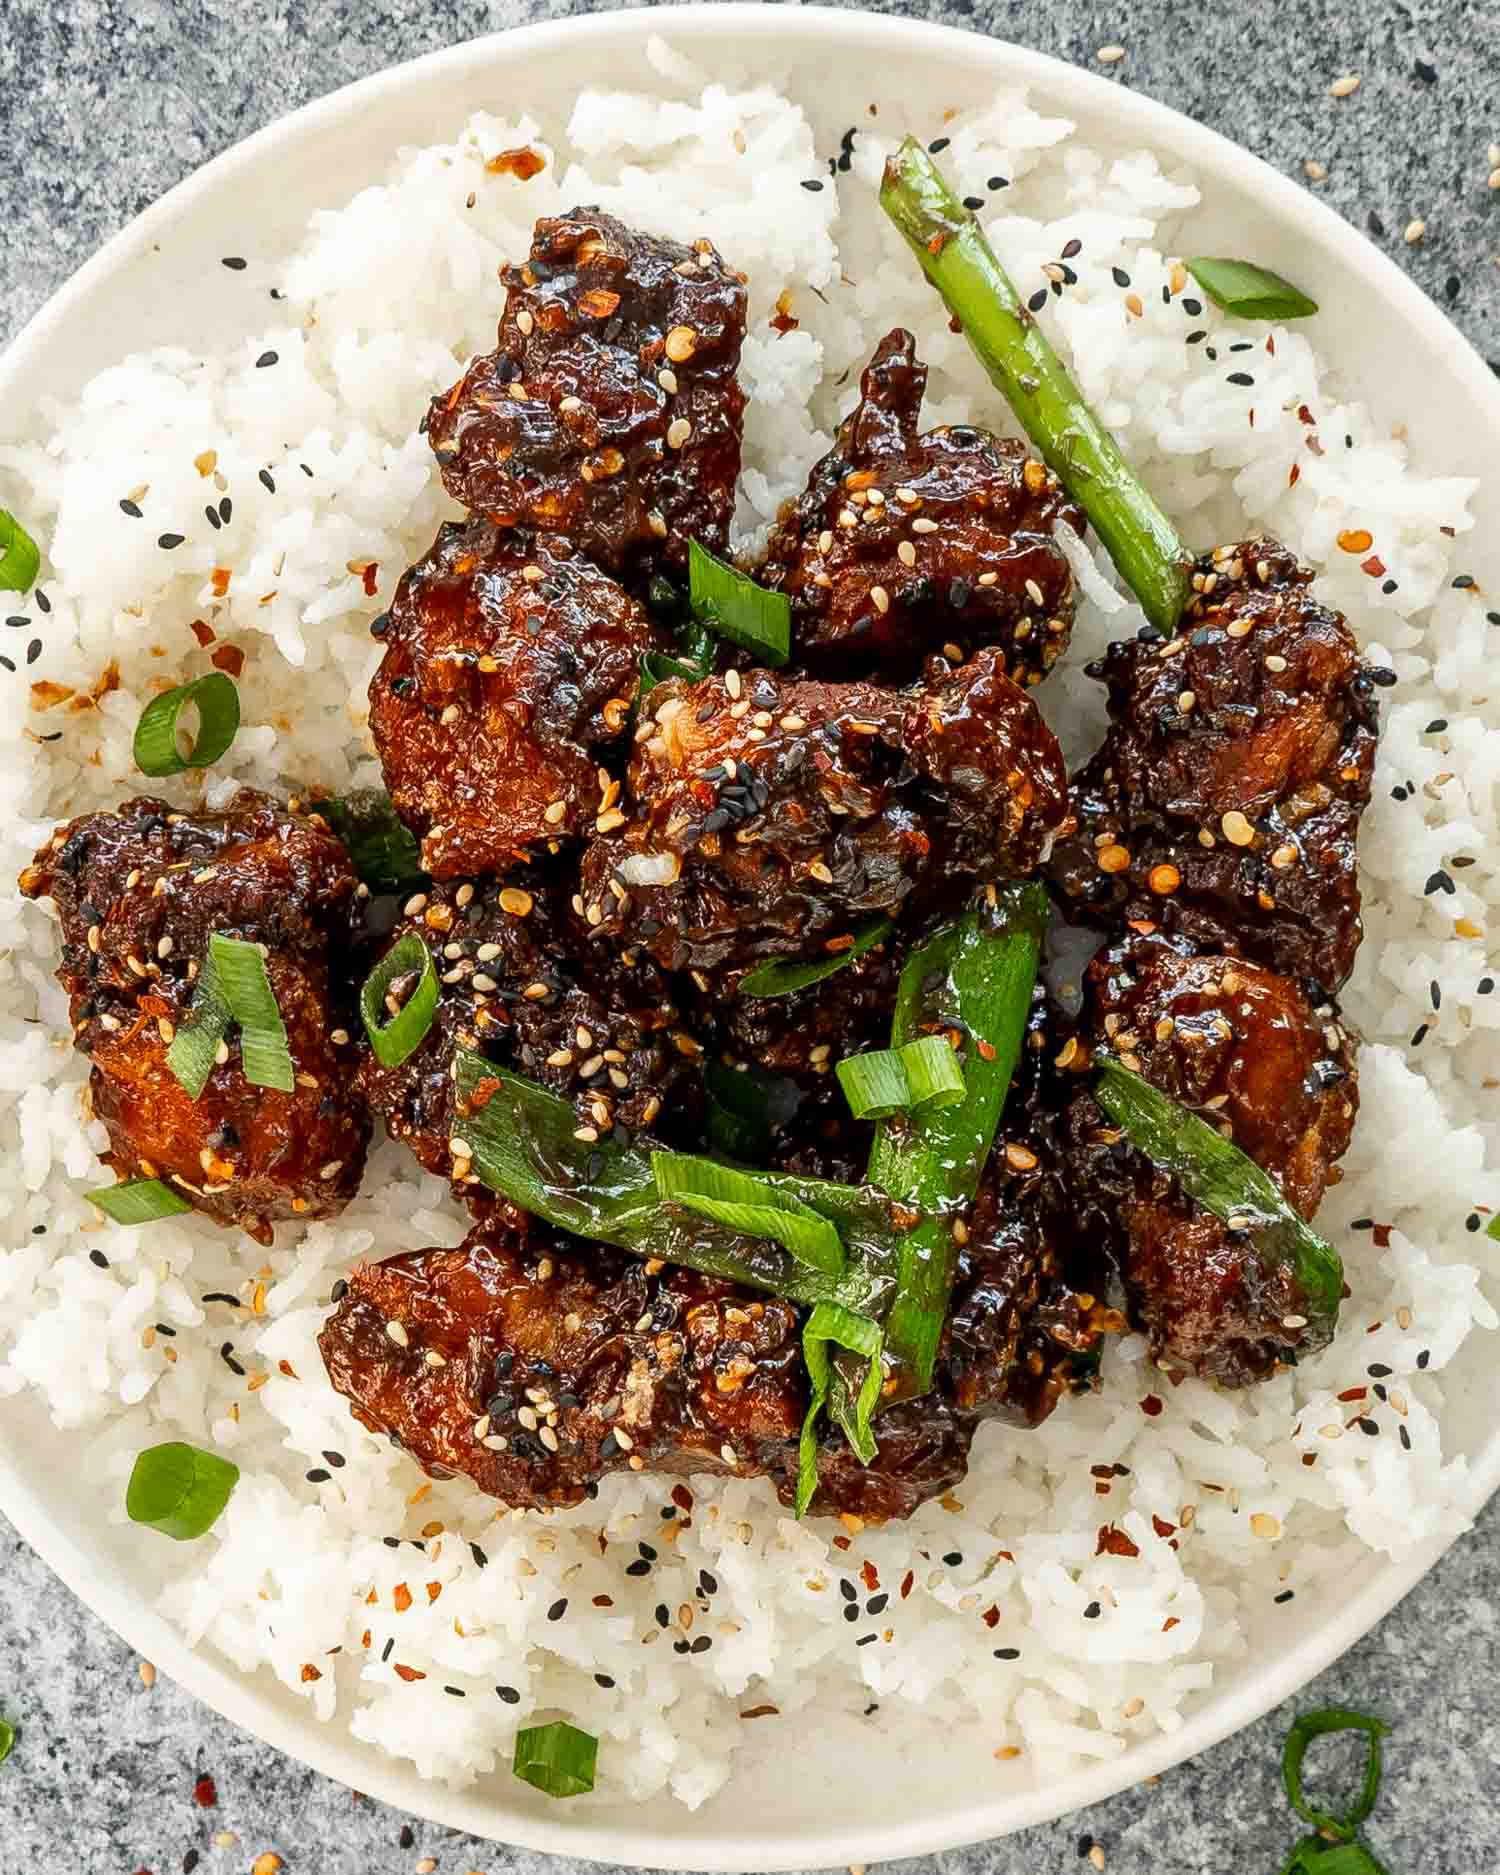 freshly made general tso's chicken garnished with green onions and sesame seeds over a rice in a white plate.